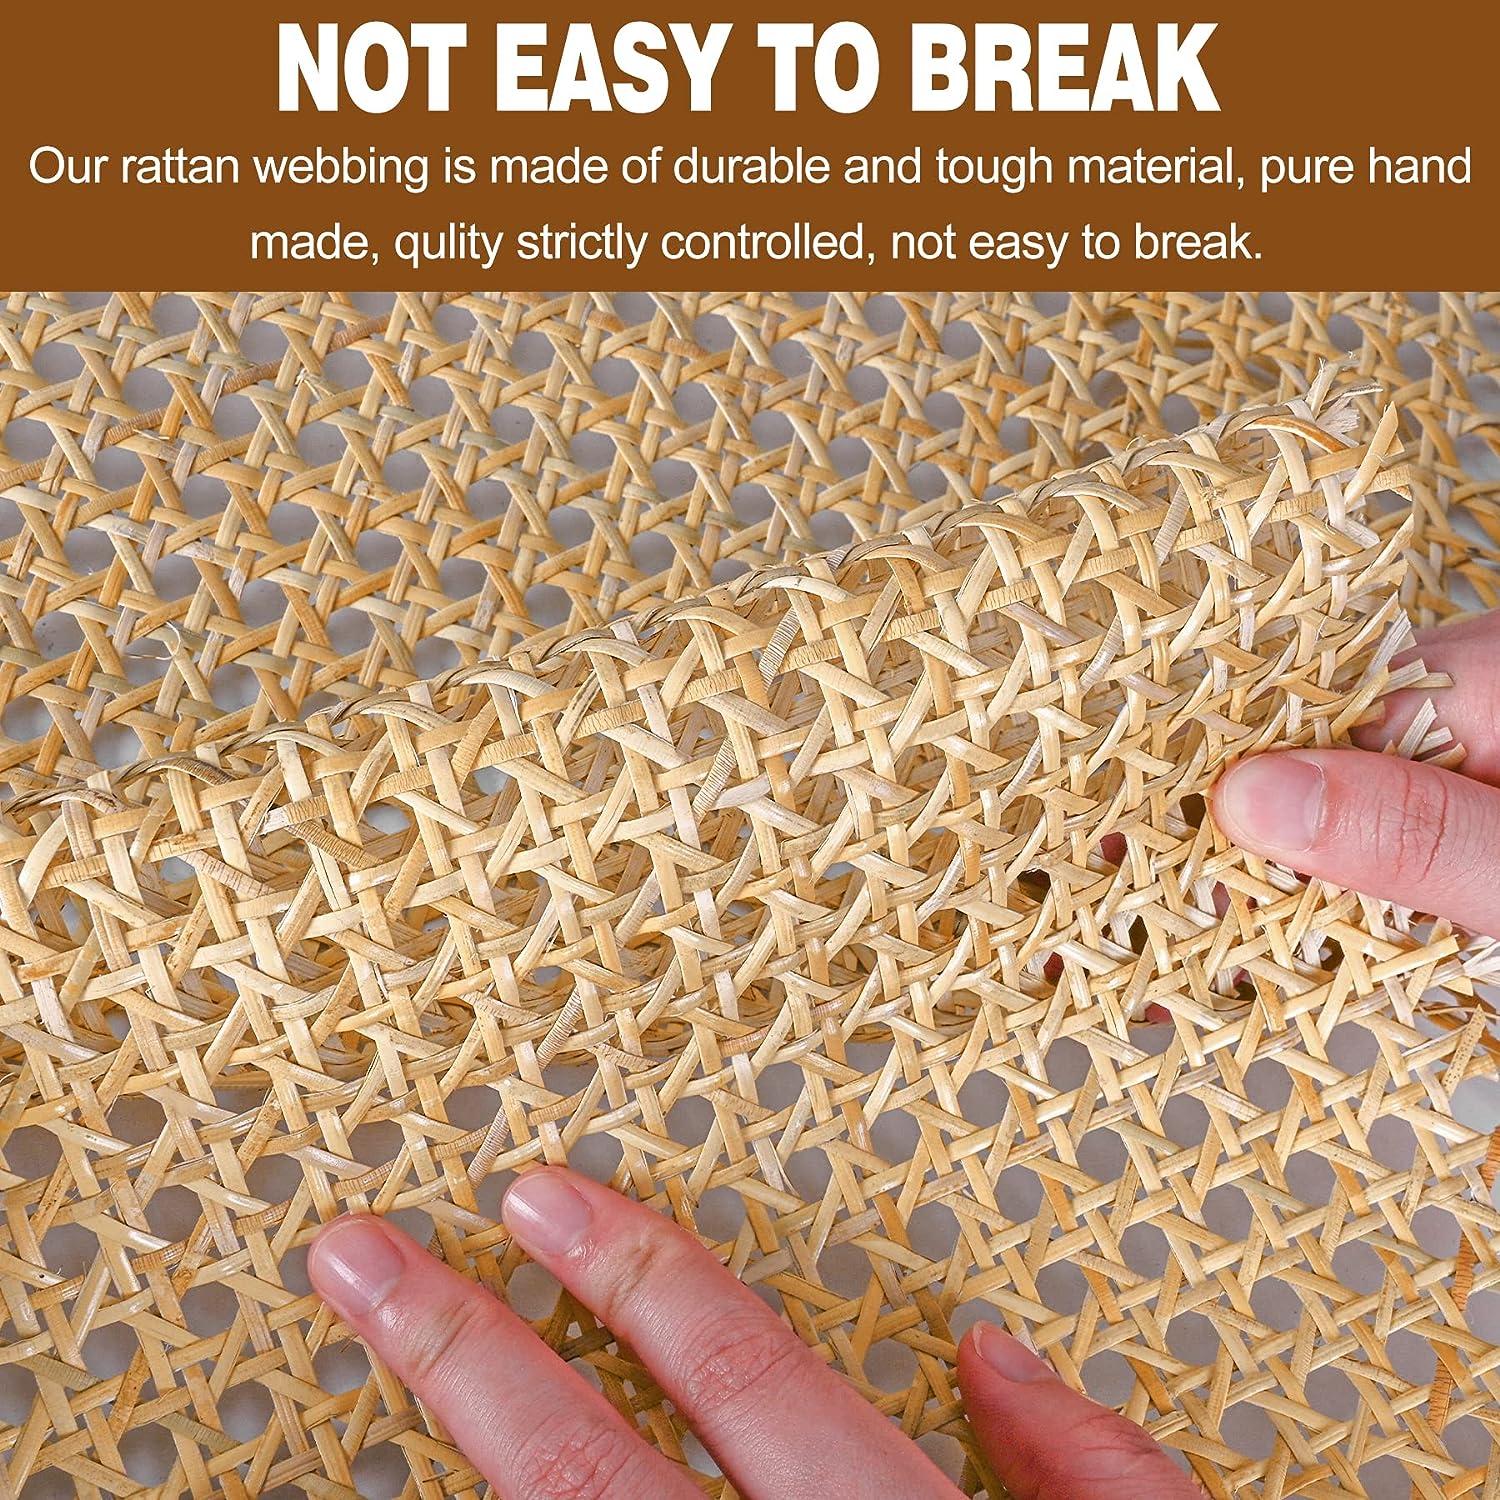 How to Replace Pressed Cane Webbing